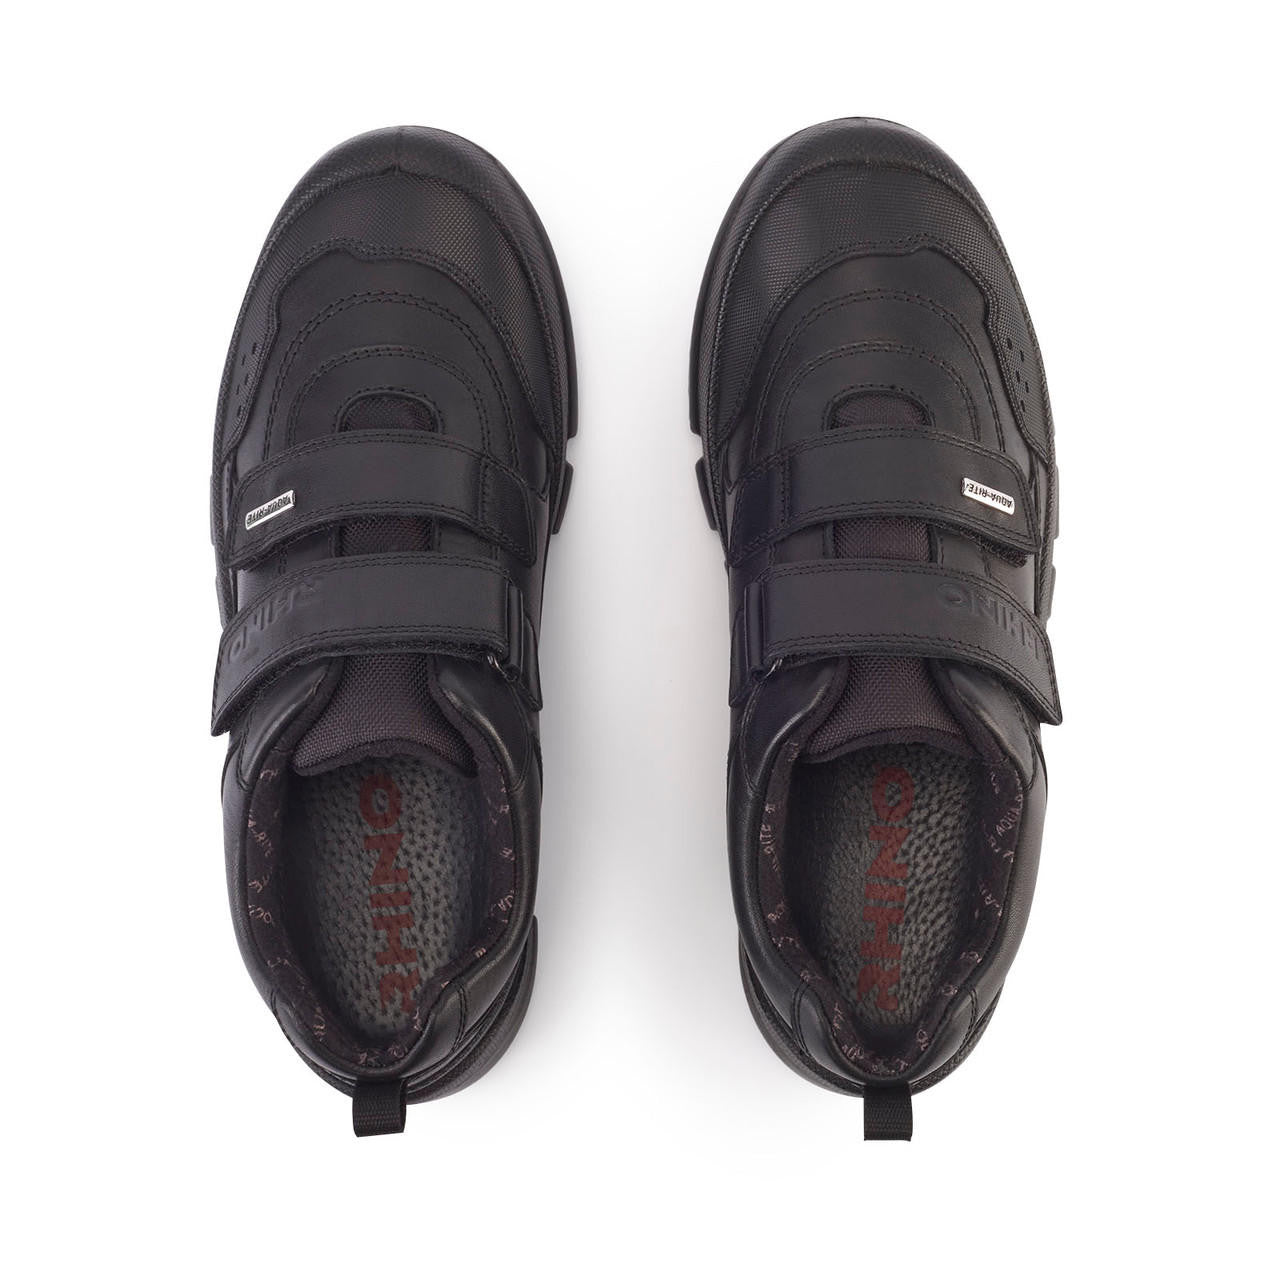 A pair of boys waterproof school shoes by Start Rite, style Trooper, in black leather with double velcro fastening. View from above..